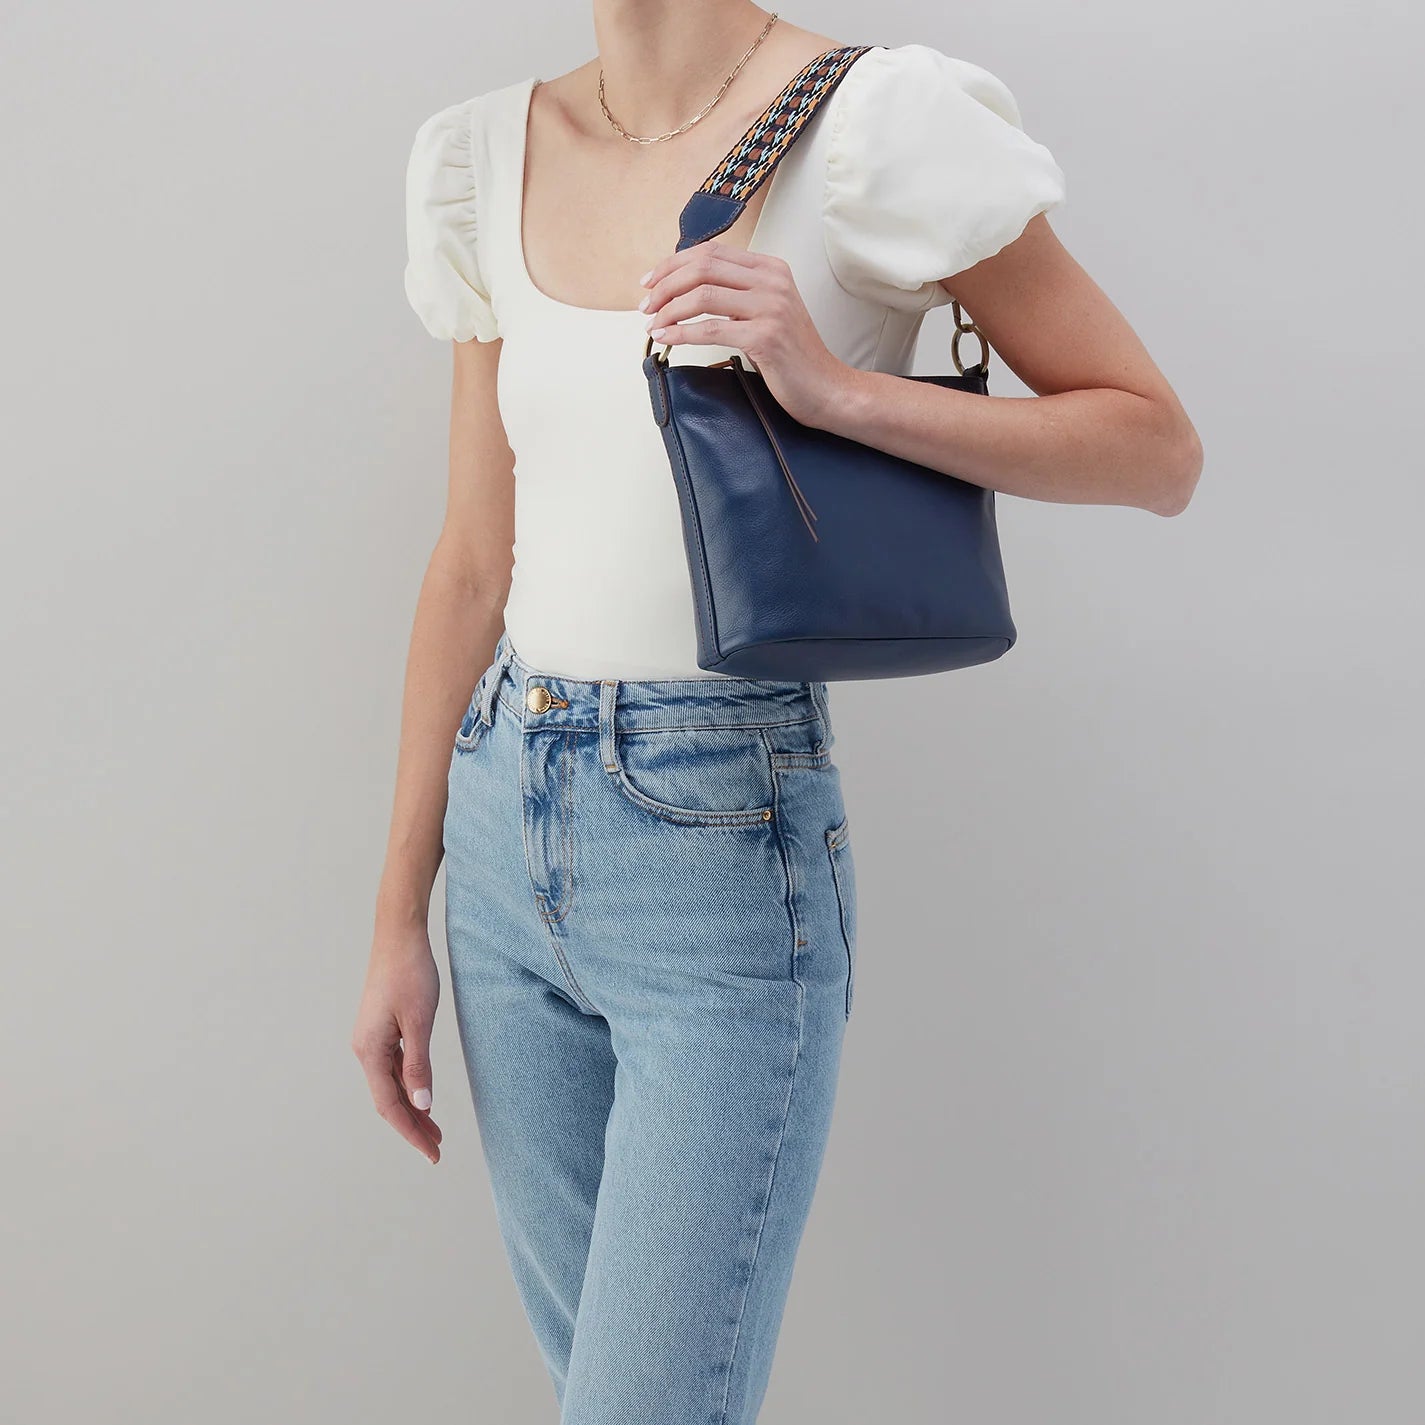 person wearing jeans and a white top with navy bell shoulder bag on their shoulder.